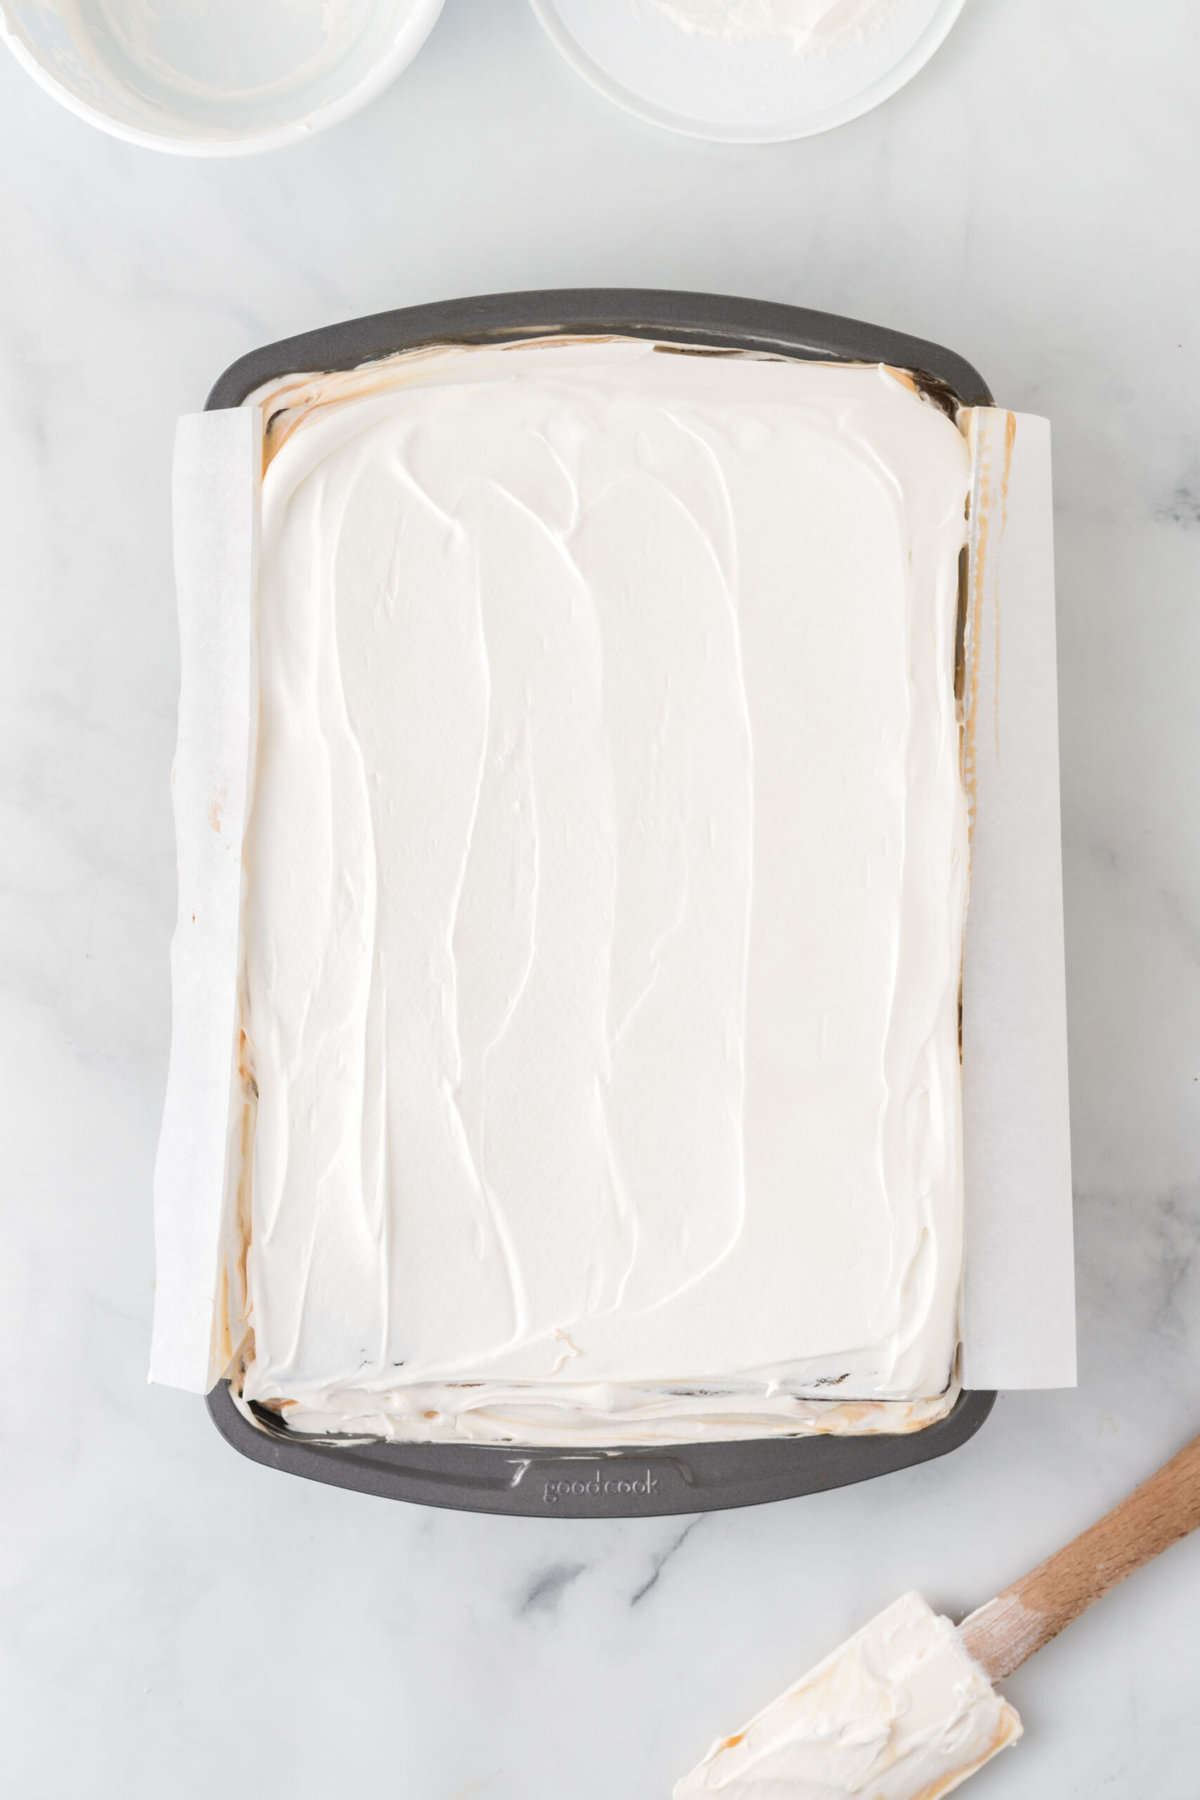 Overhead view of ice cream sandwich cake in pan after frosting